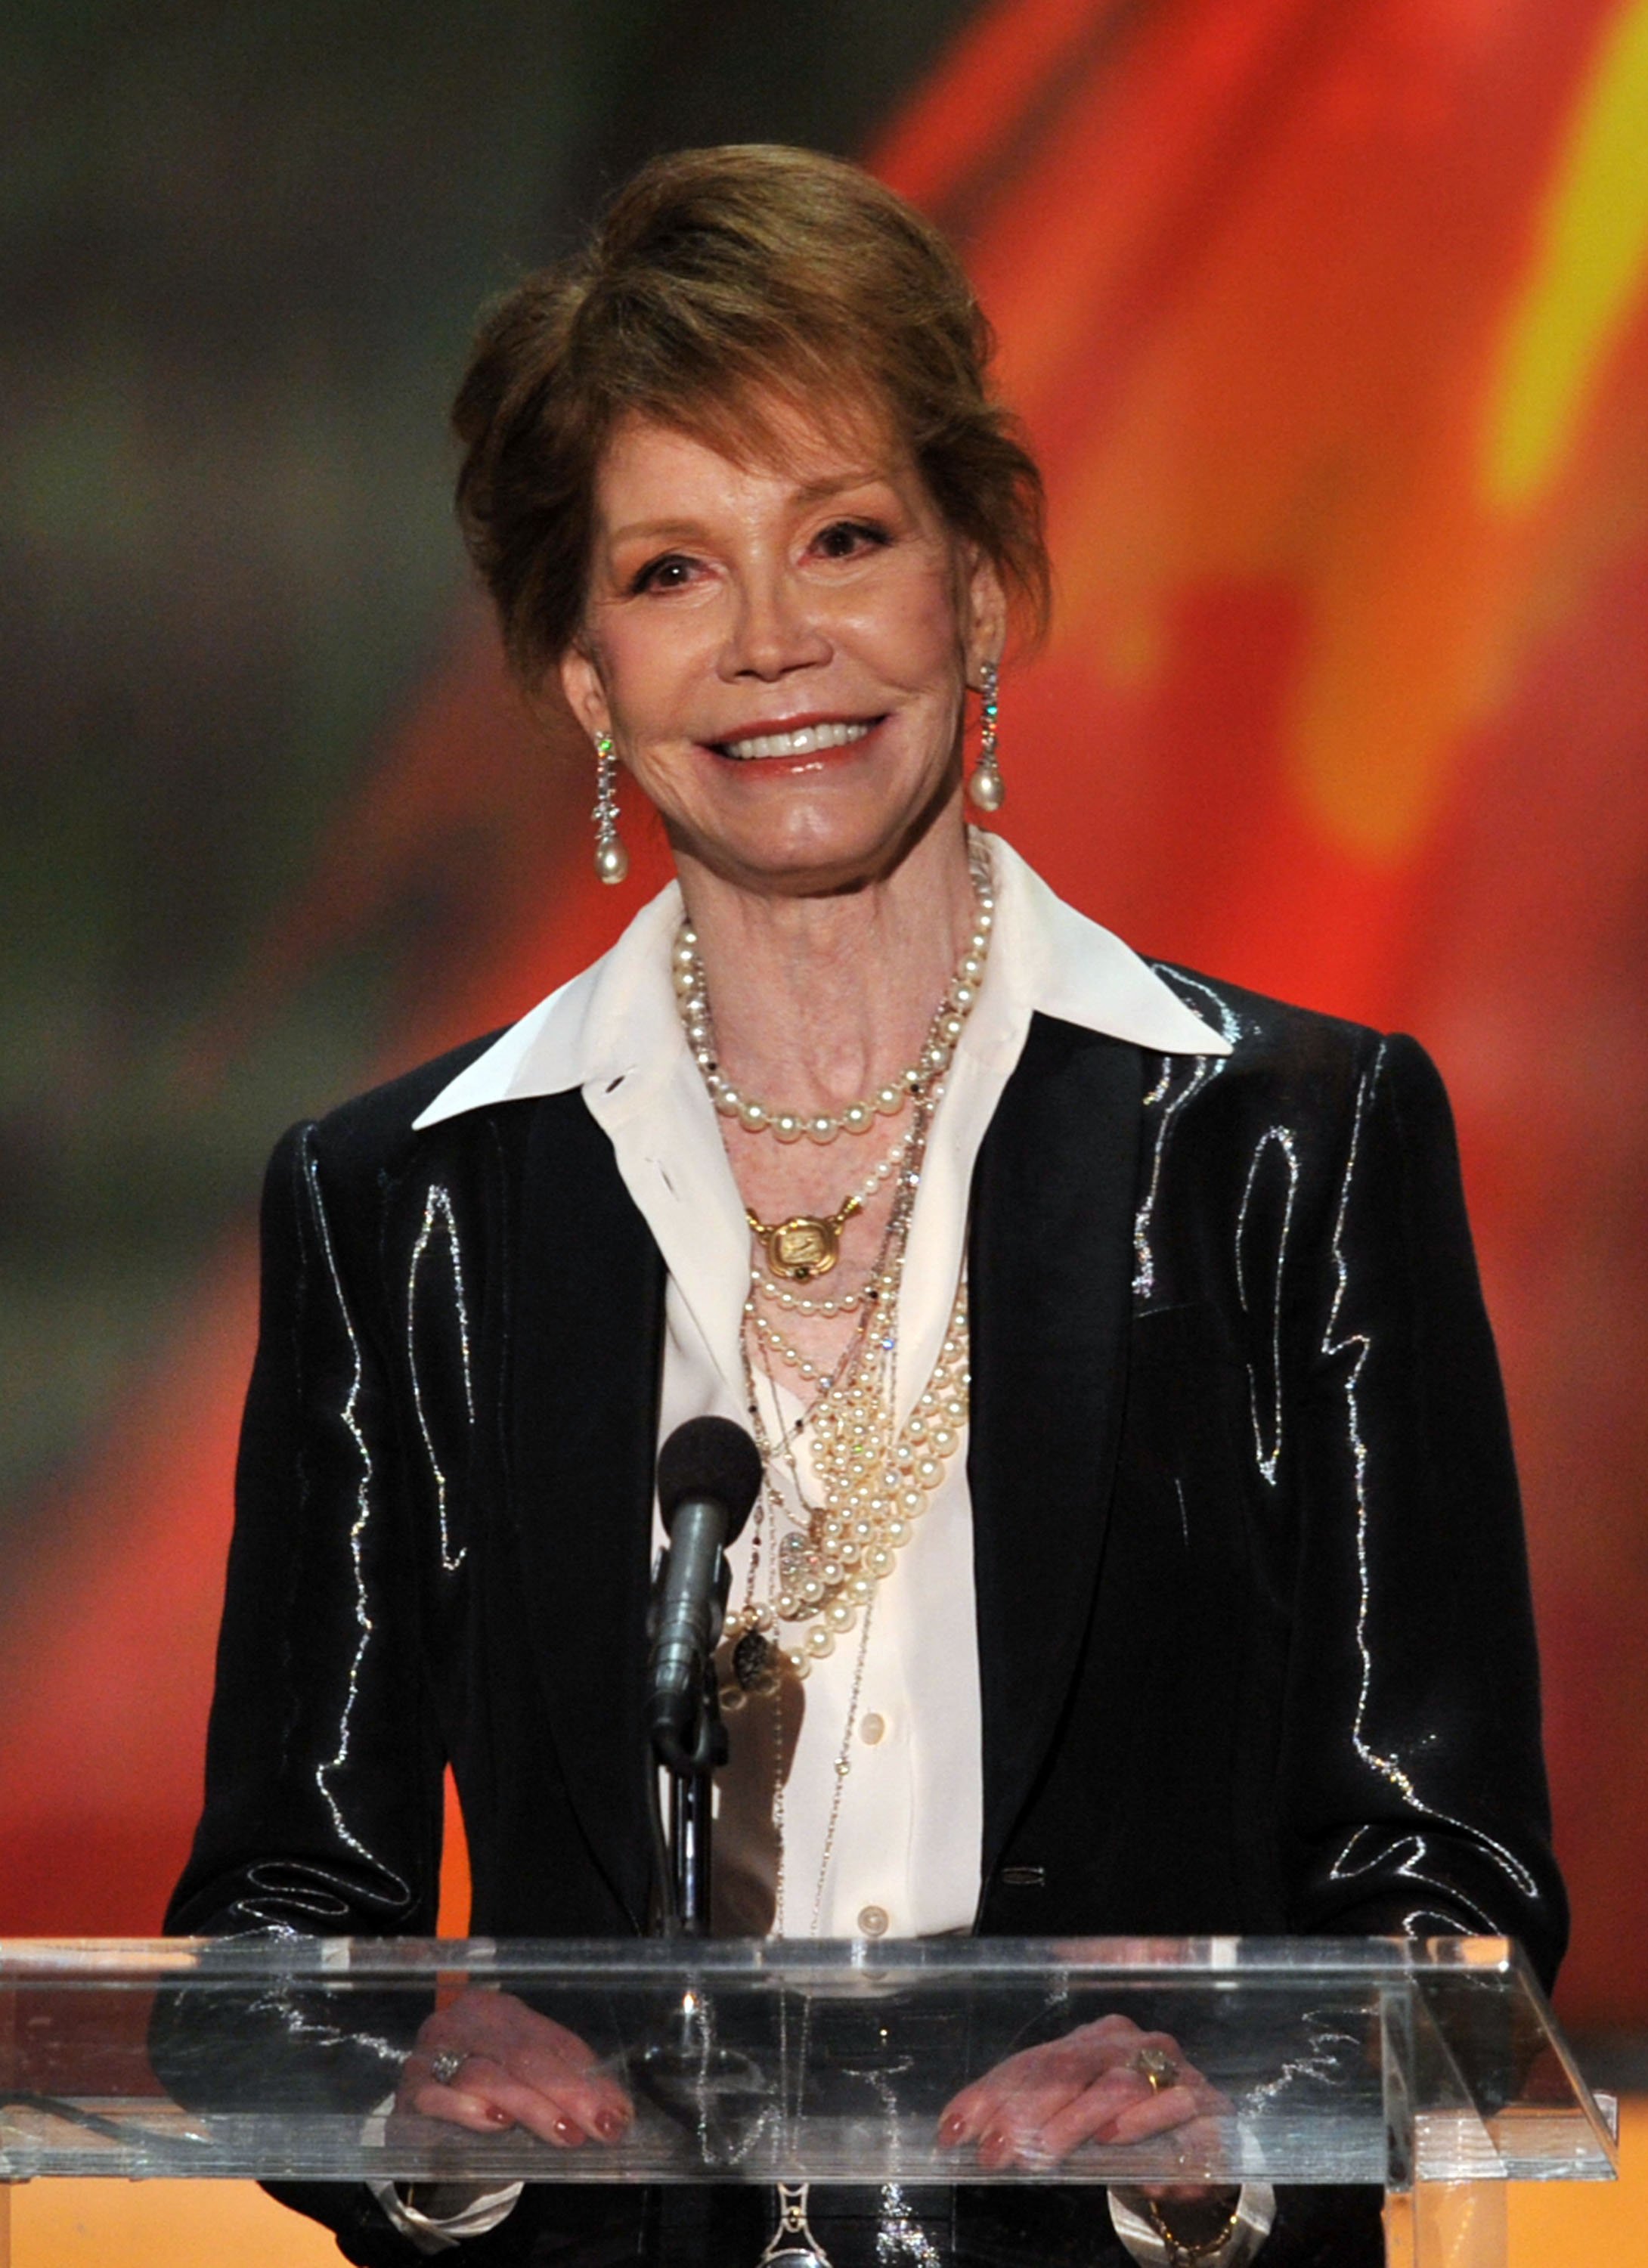 Mary Tyler Moore accepts the Life Achievement Award onstage, 2012, Los Angeles, California. | Photo: Getty Images